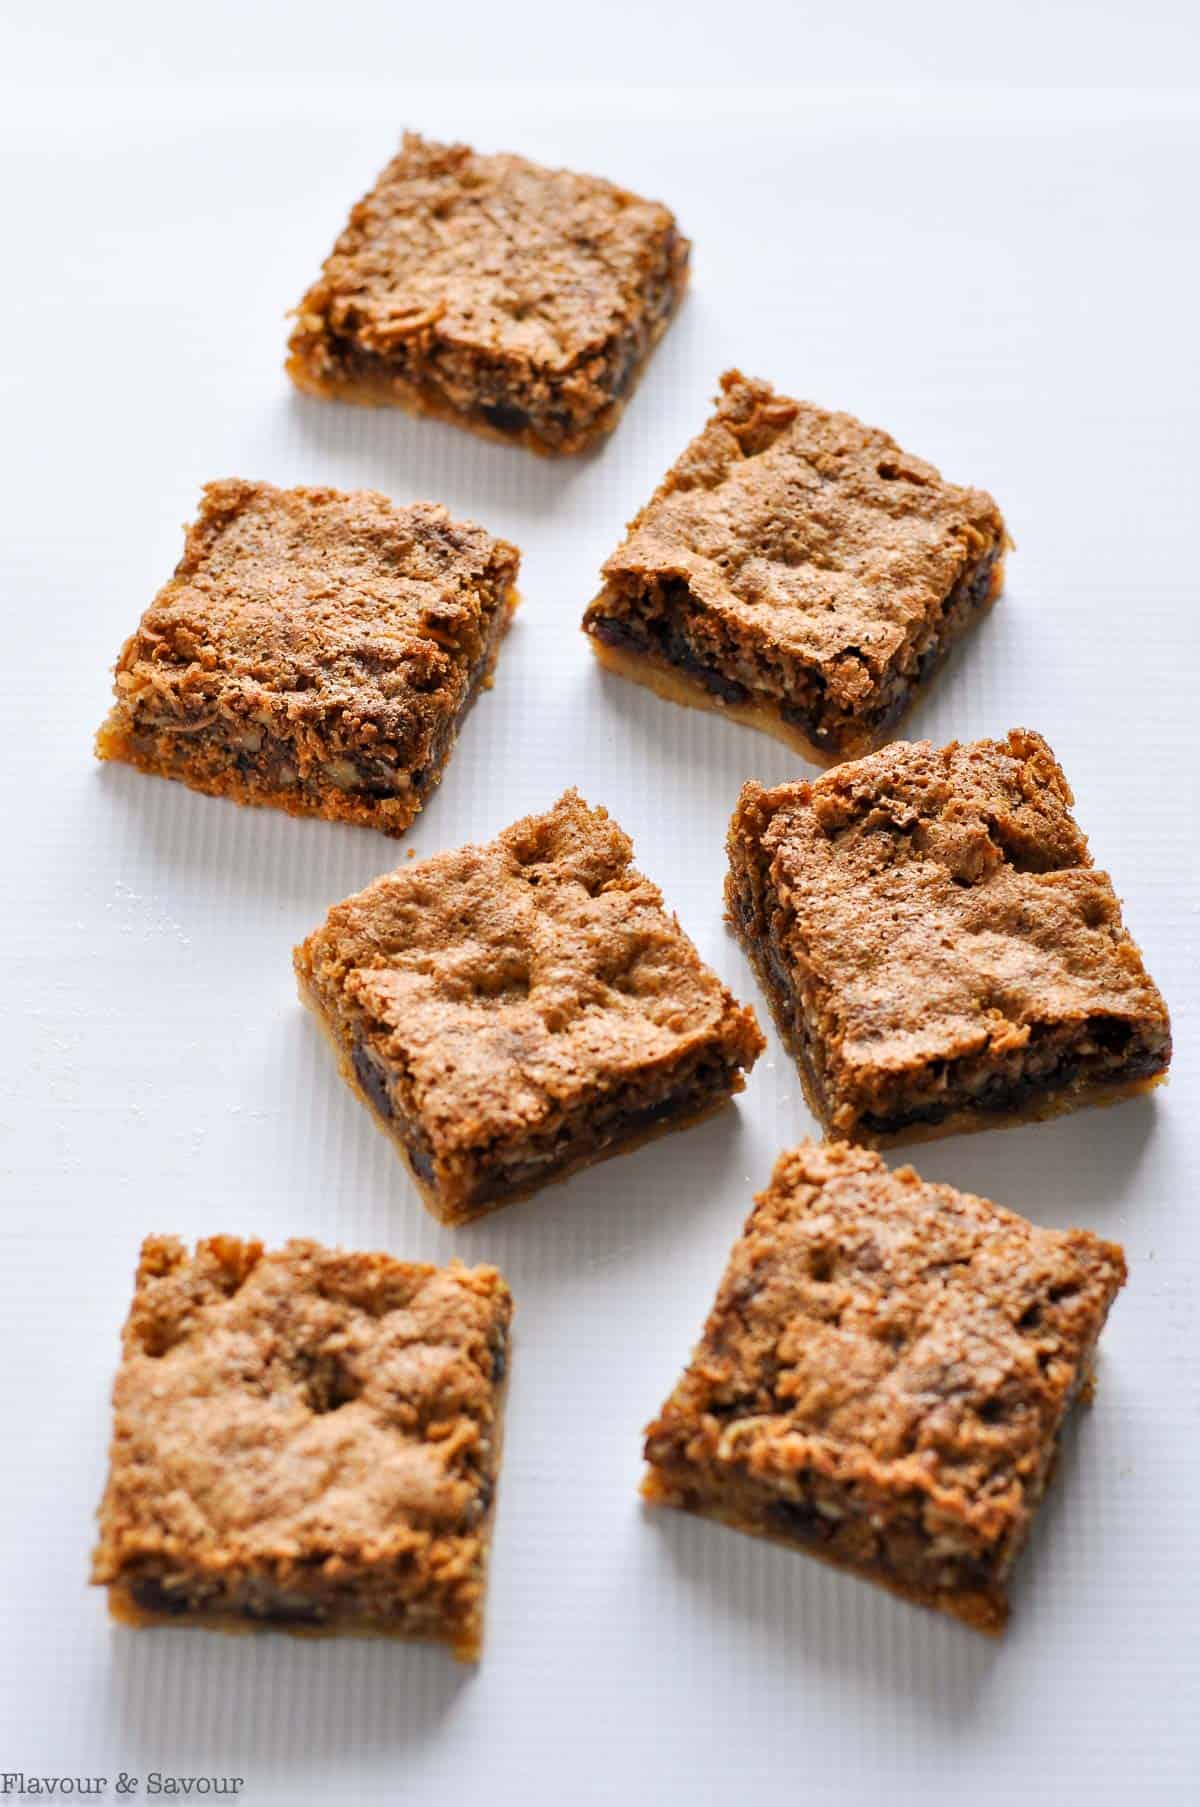 6 gluten-free butter tart squares on a white background